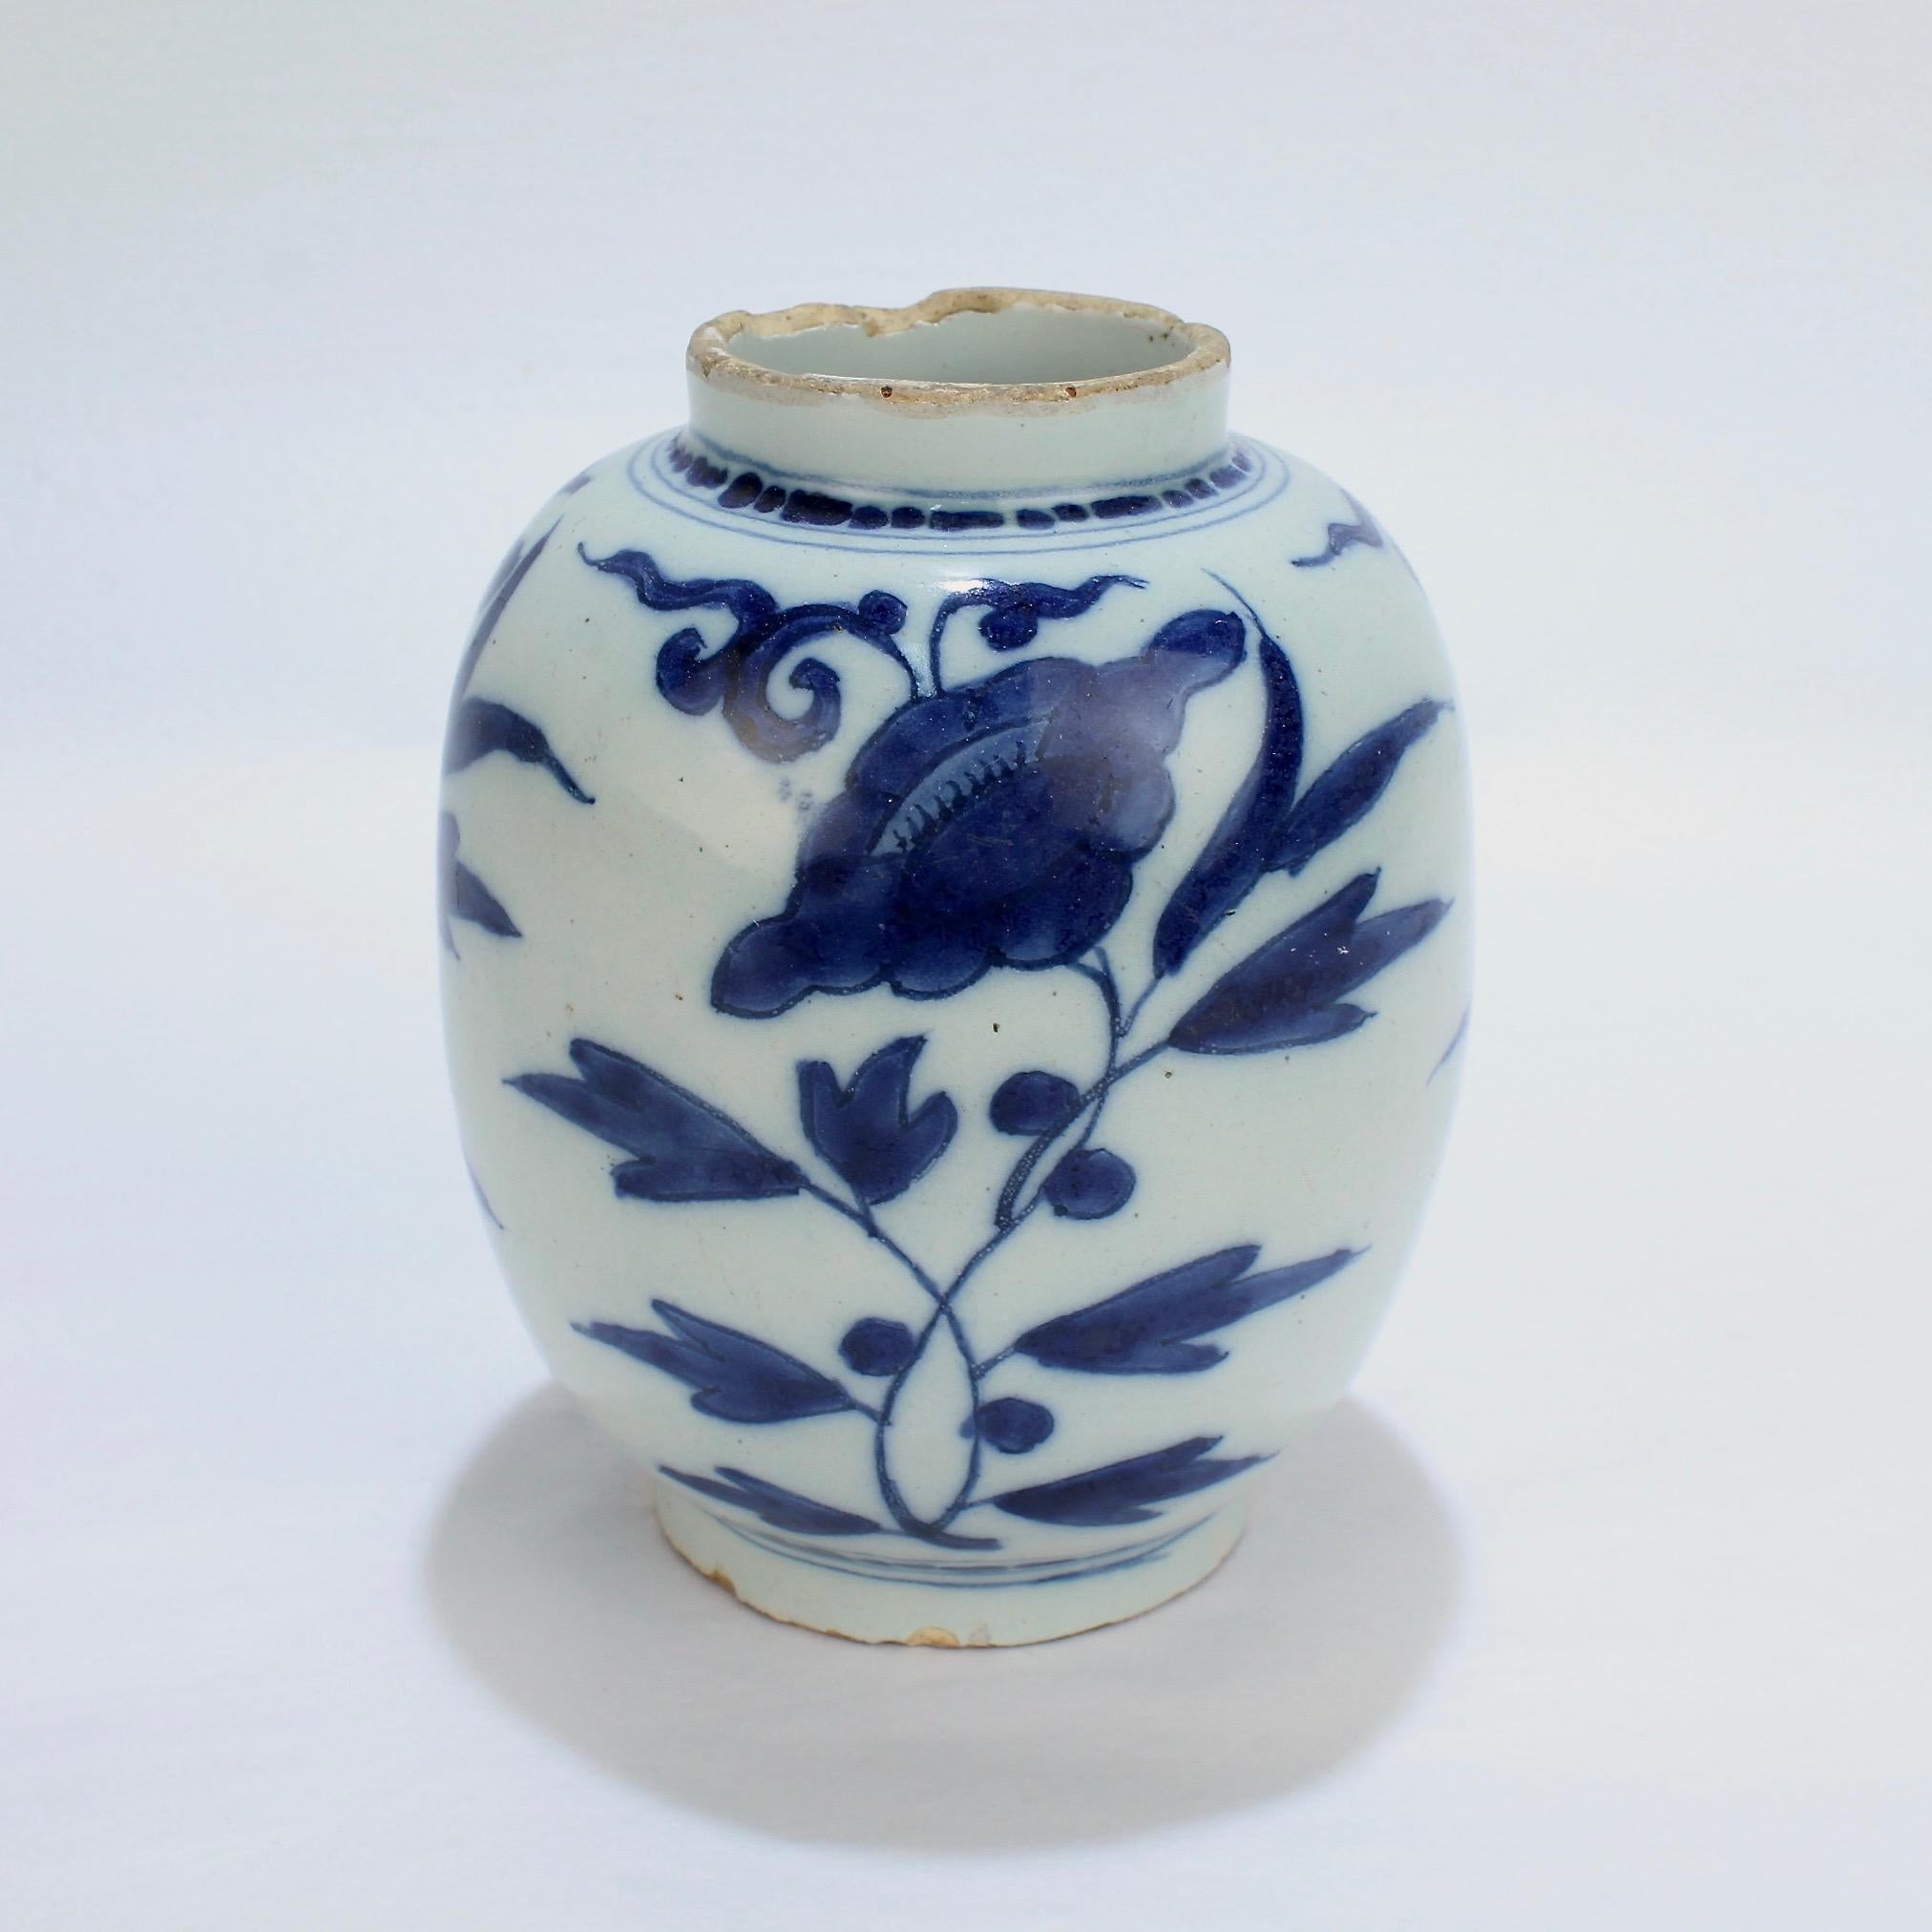 A fine, diminutive, and early Dutch Delft pottery vase or jar marked for Gerrit Kam.

With a stylized Chinese peony flower pattern.

Bearing an underglaze blue GK monogram to the base for Gerrit Kam.

During his lifetime, Kam was active both in the